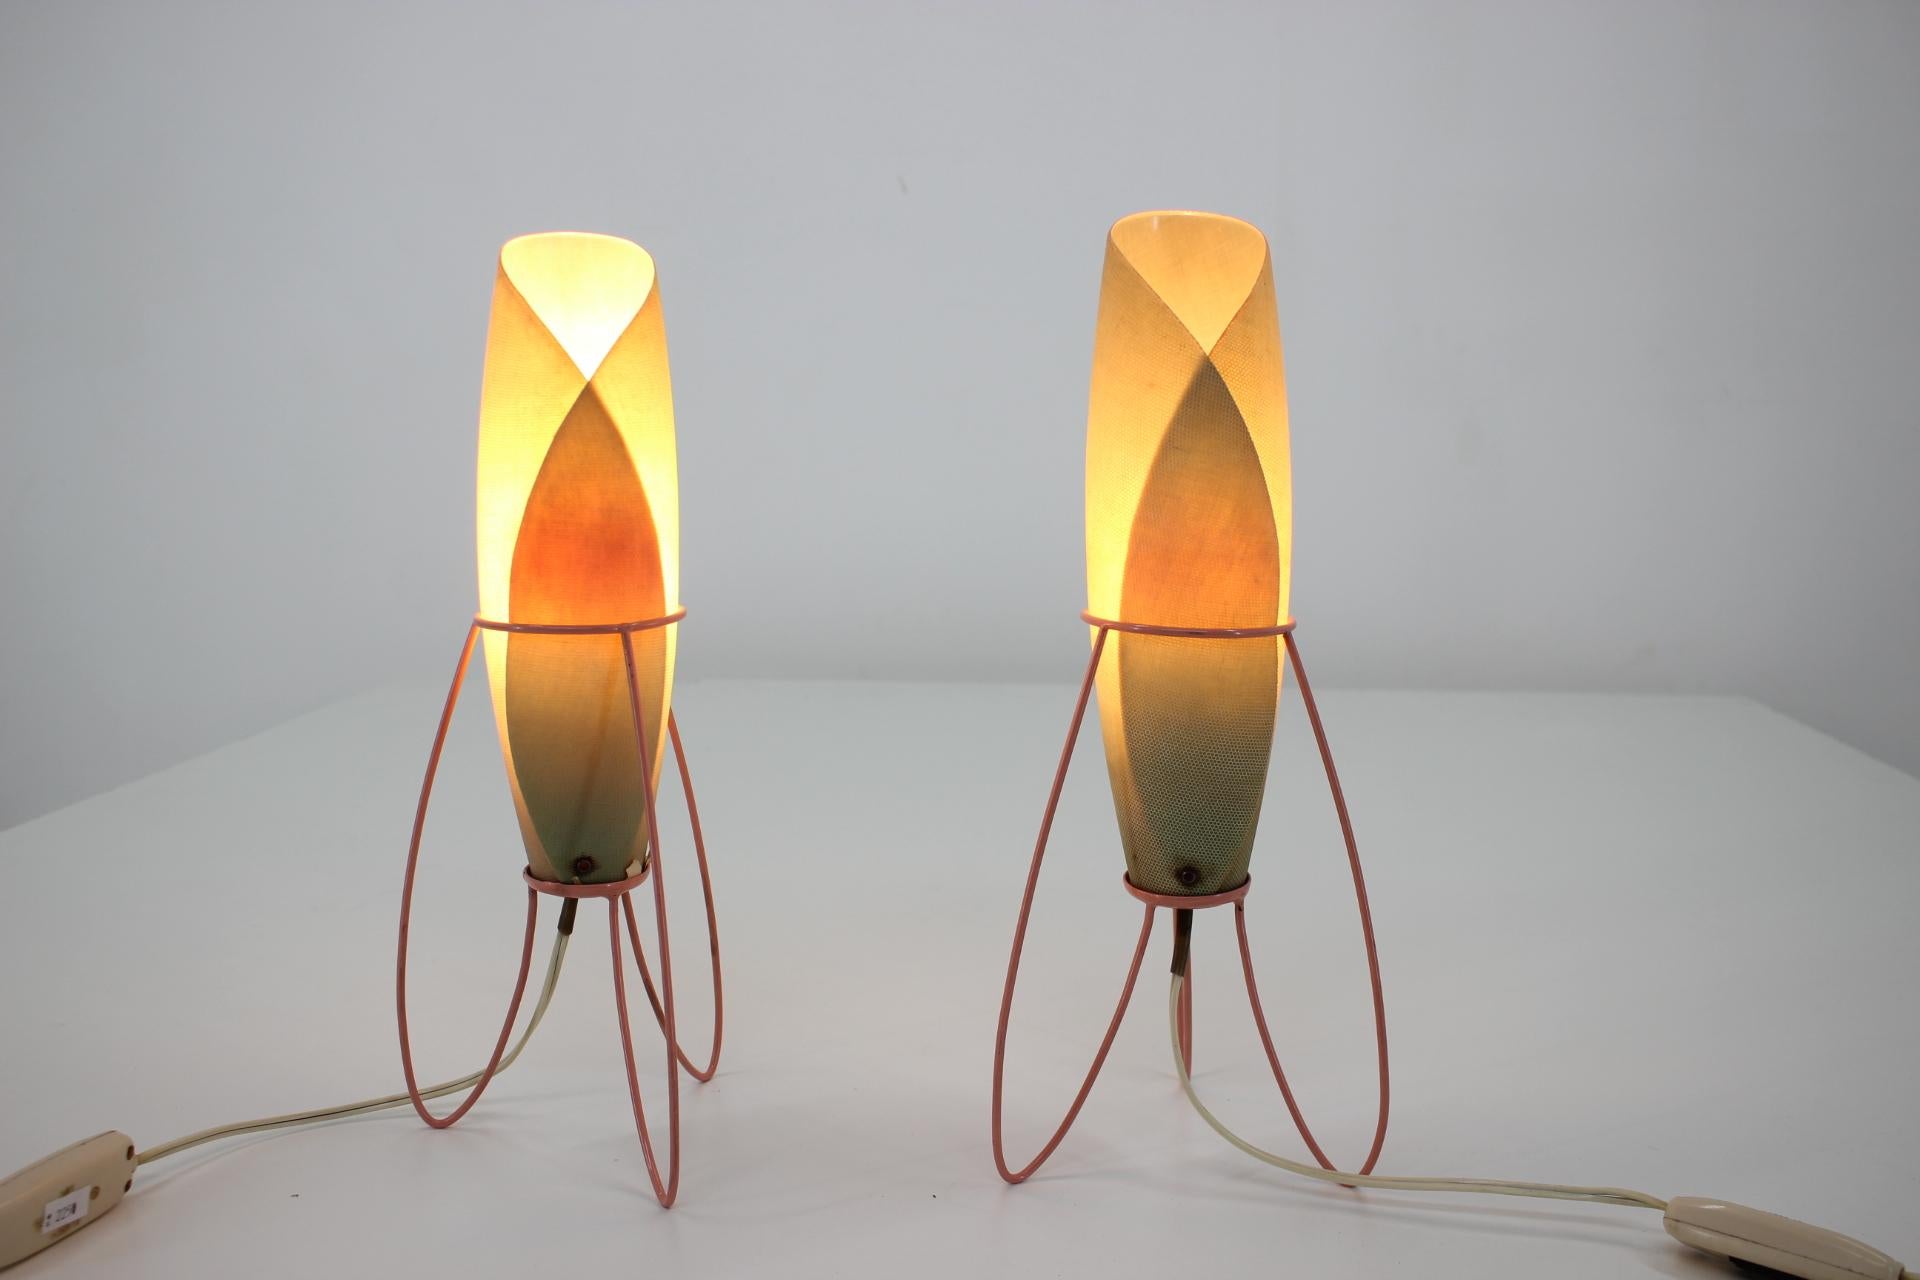 Slovak Pair of Two Space Age Rare Table Lamps, Rockets by Pokrok Zilina, 1960s For Sale